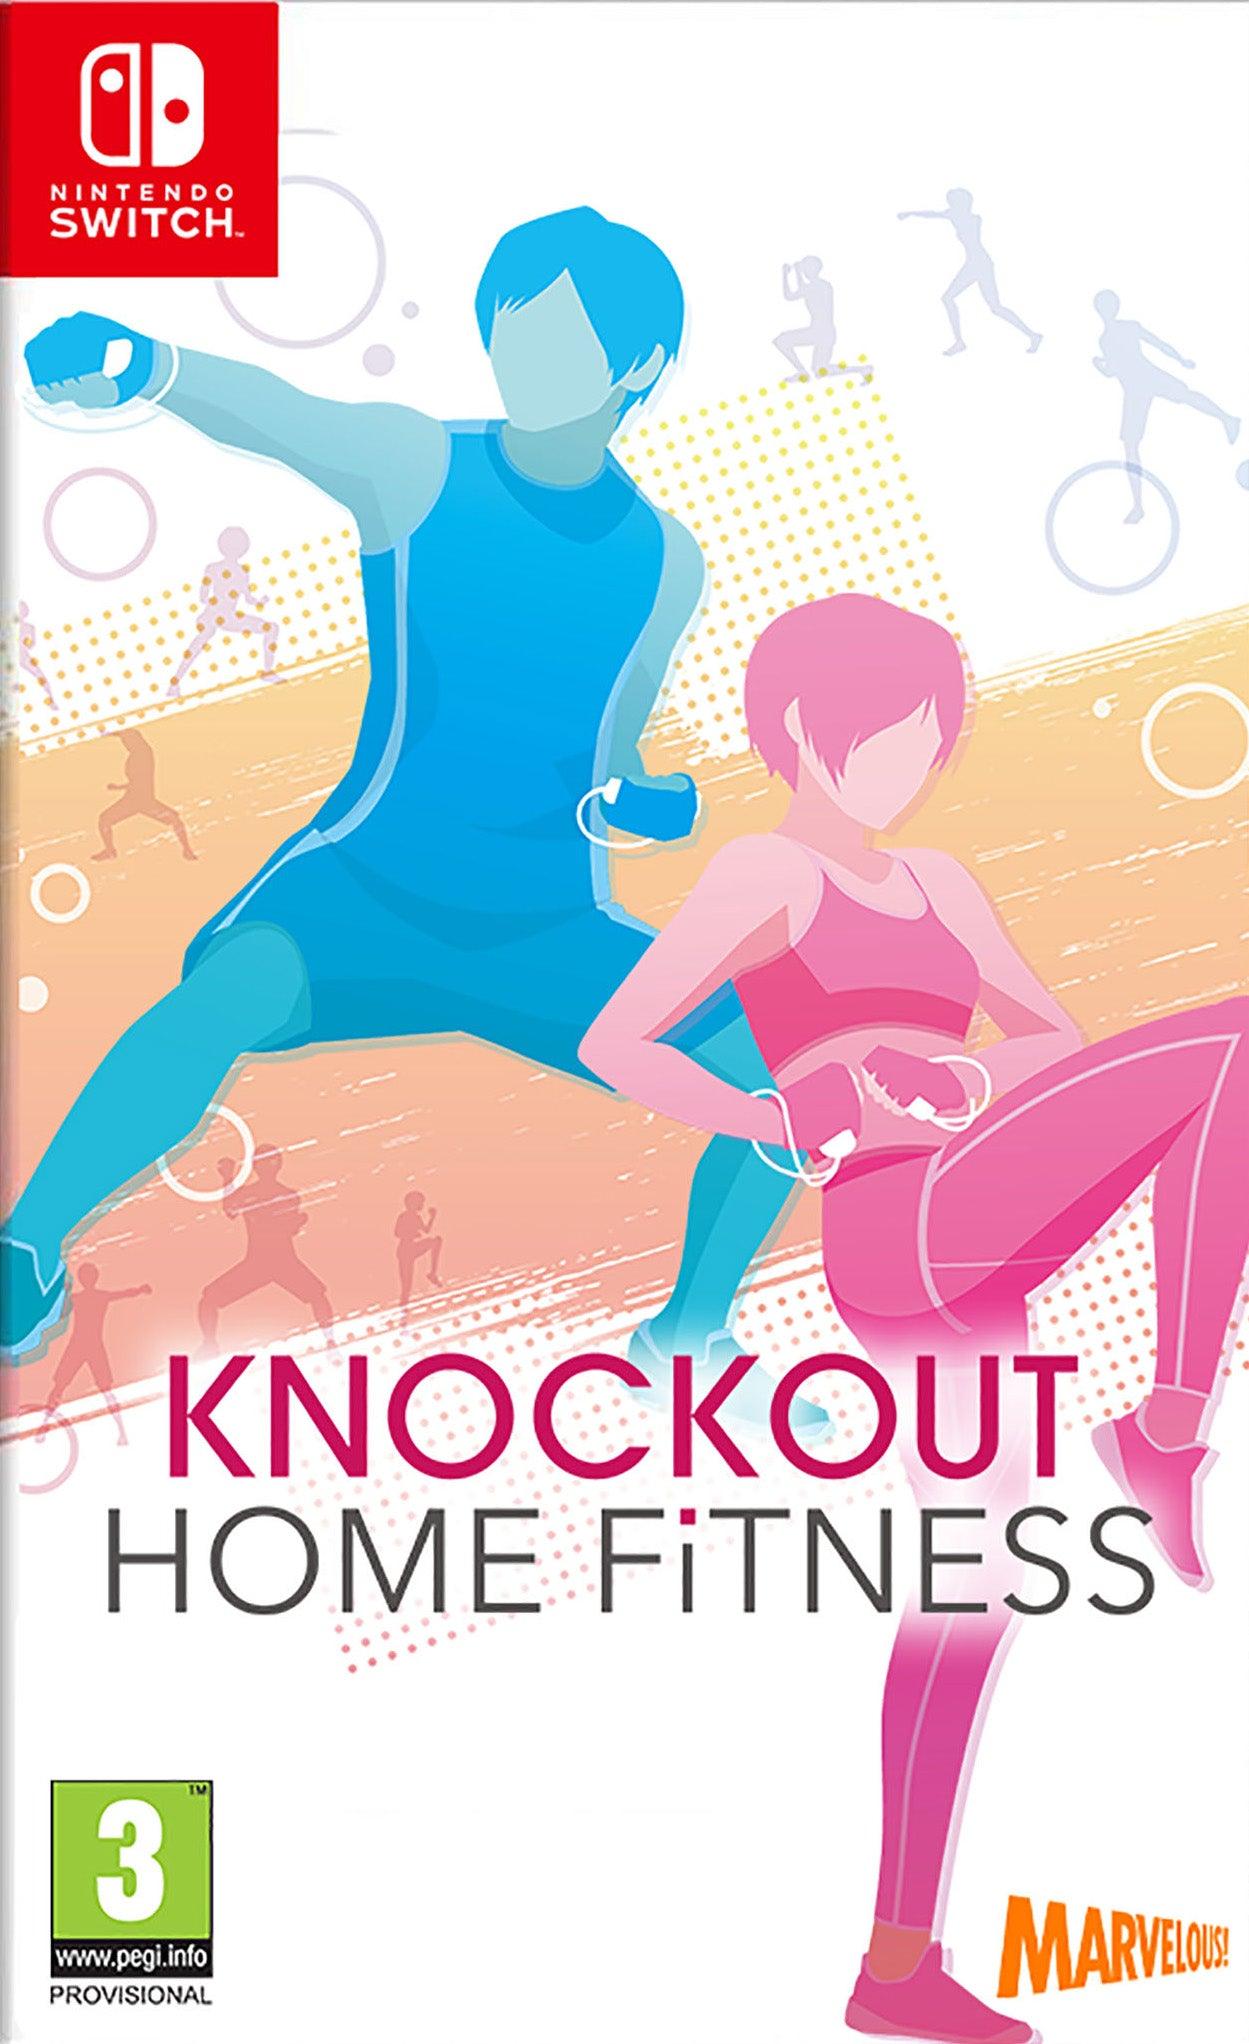 Knockout Home Fitness - Want a New Gadget